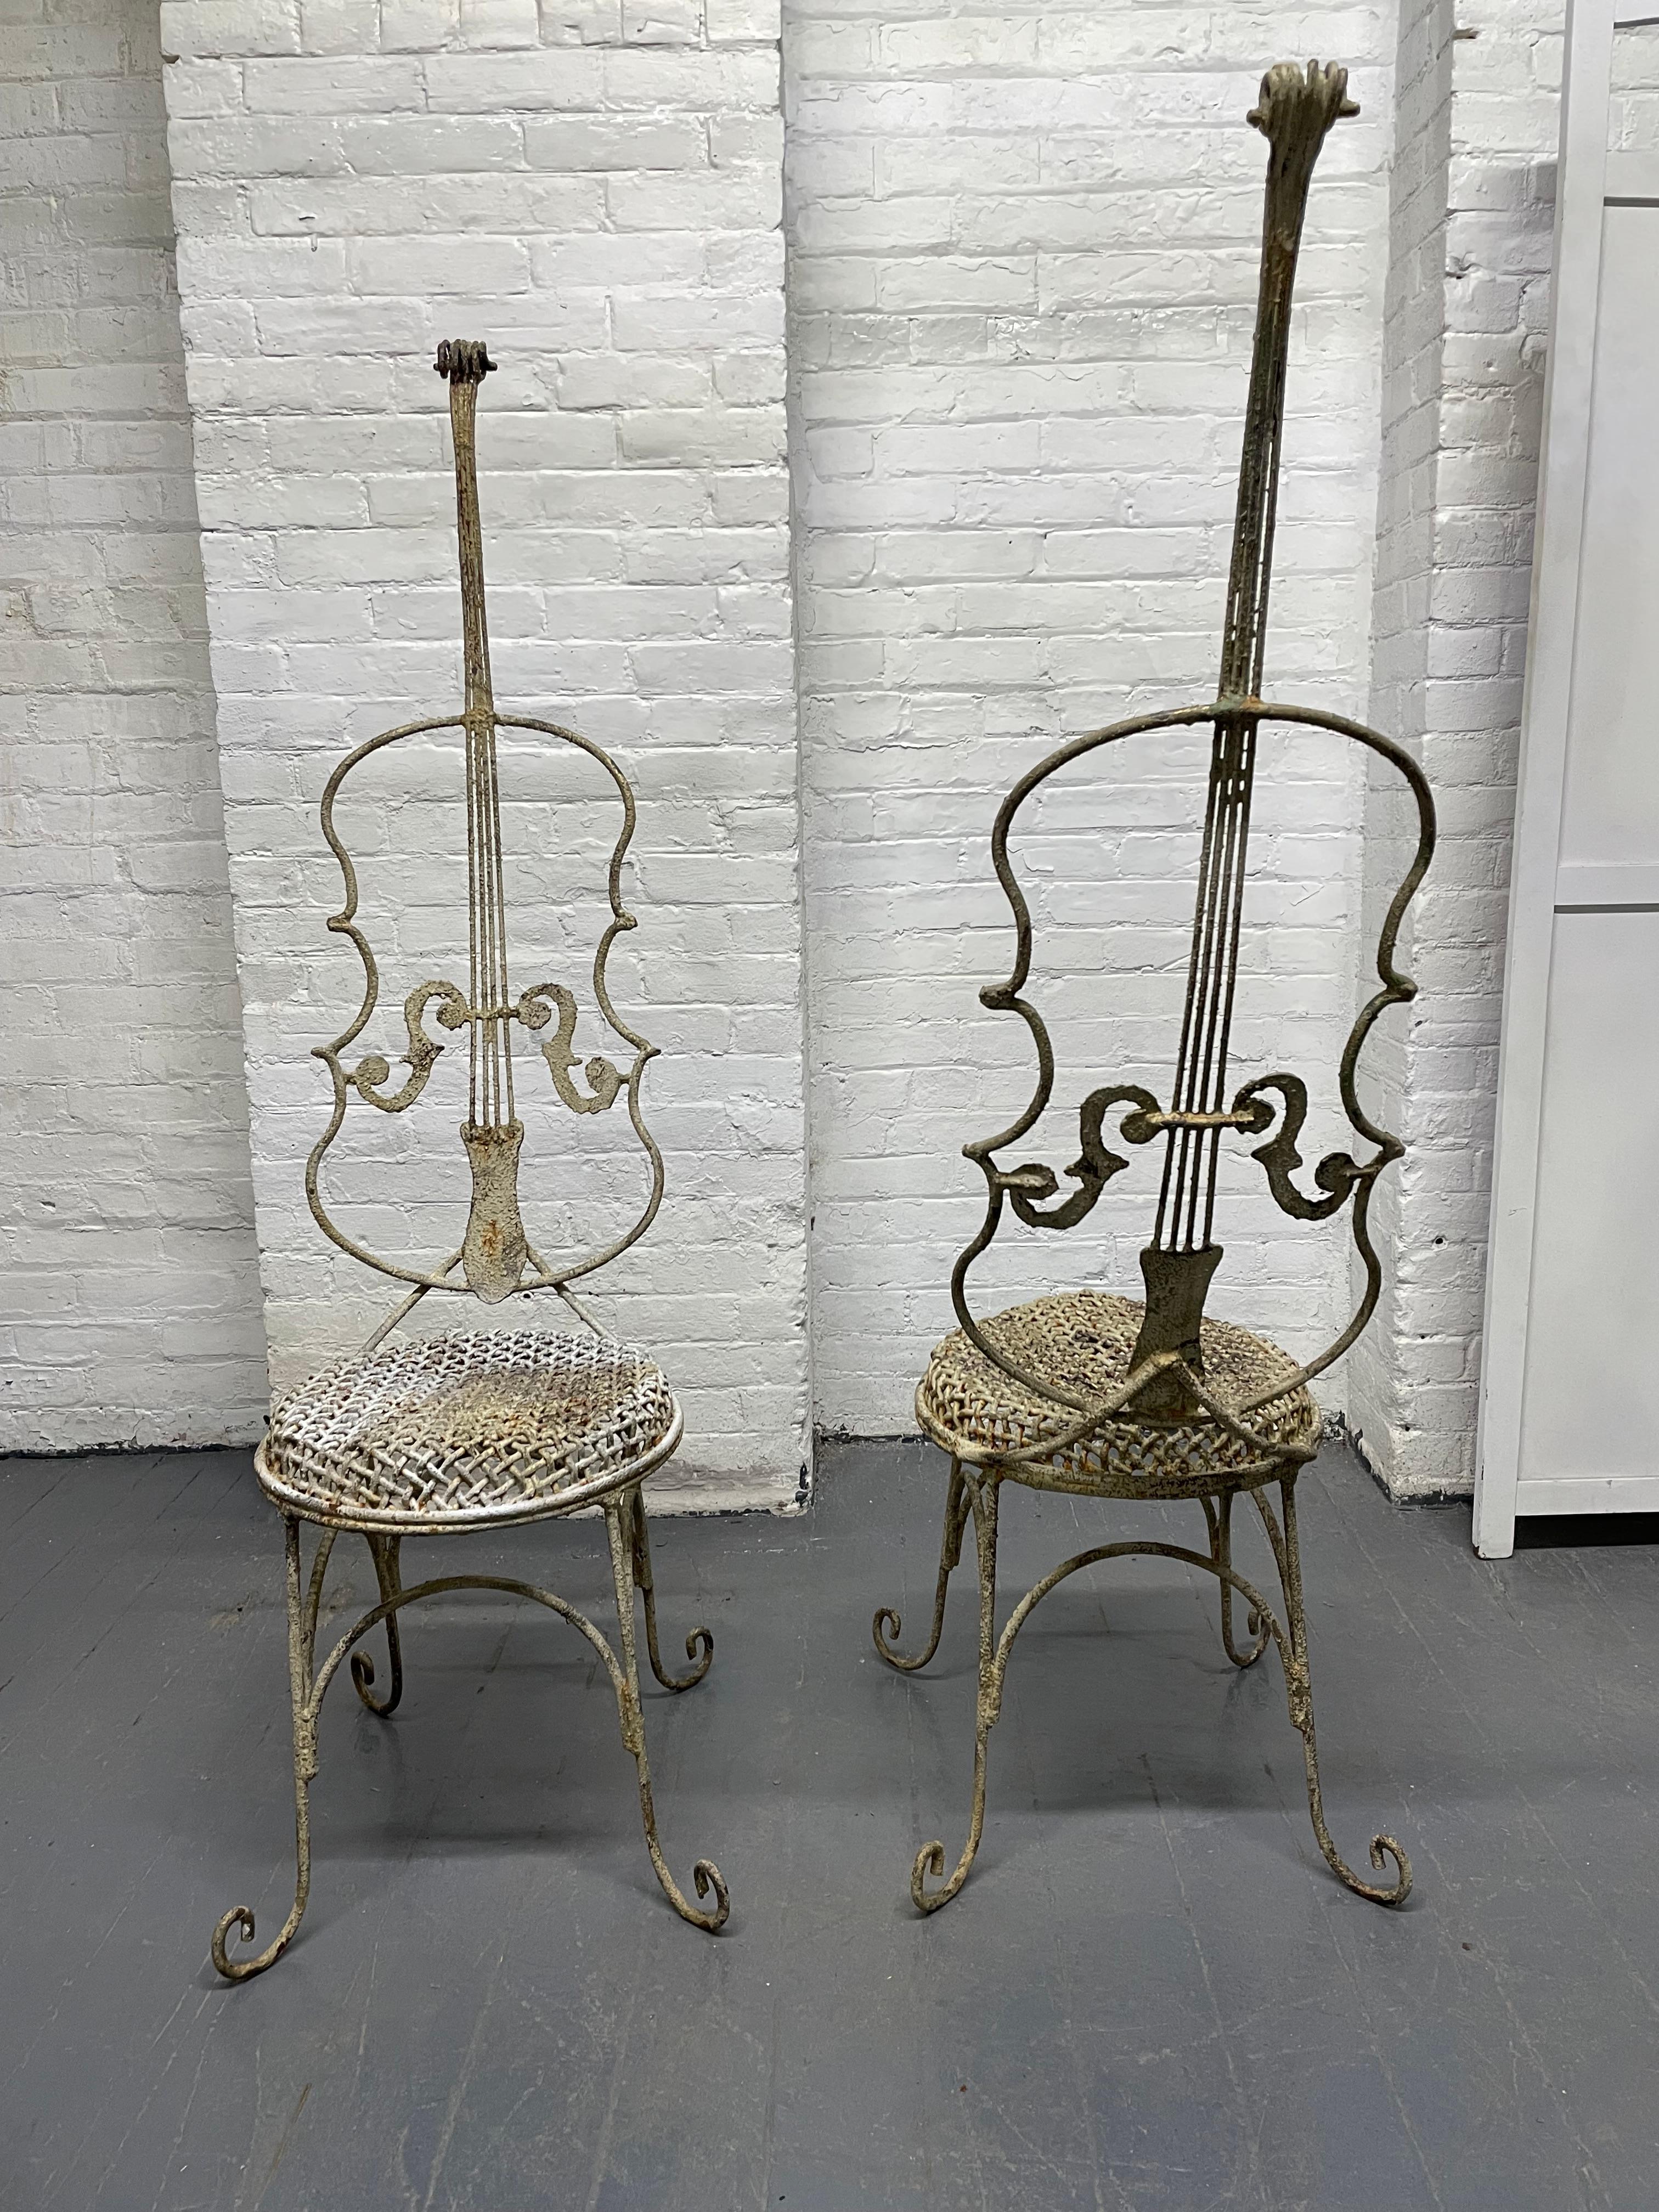 Pair of vintage painted iron cello-form chairs. The chairs have scrolled feet, tall backs and basket weave style raised circular seats.